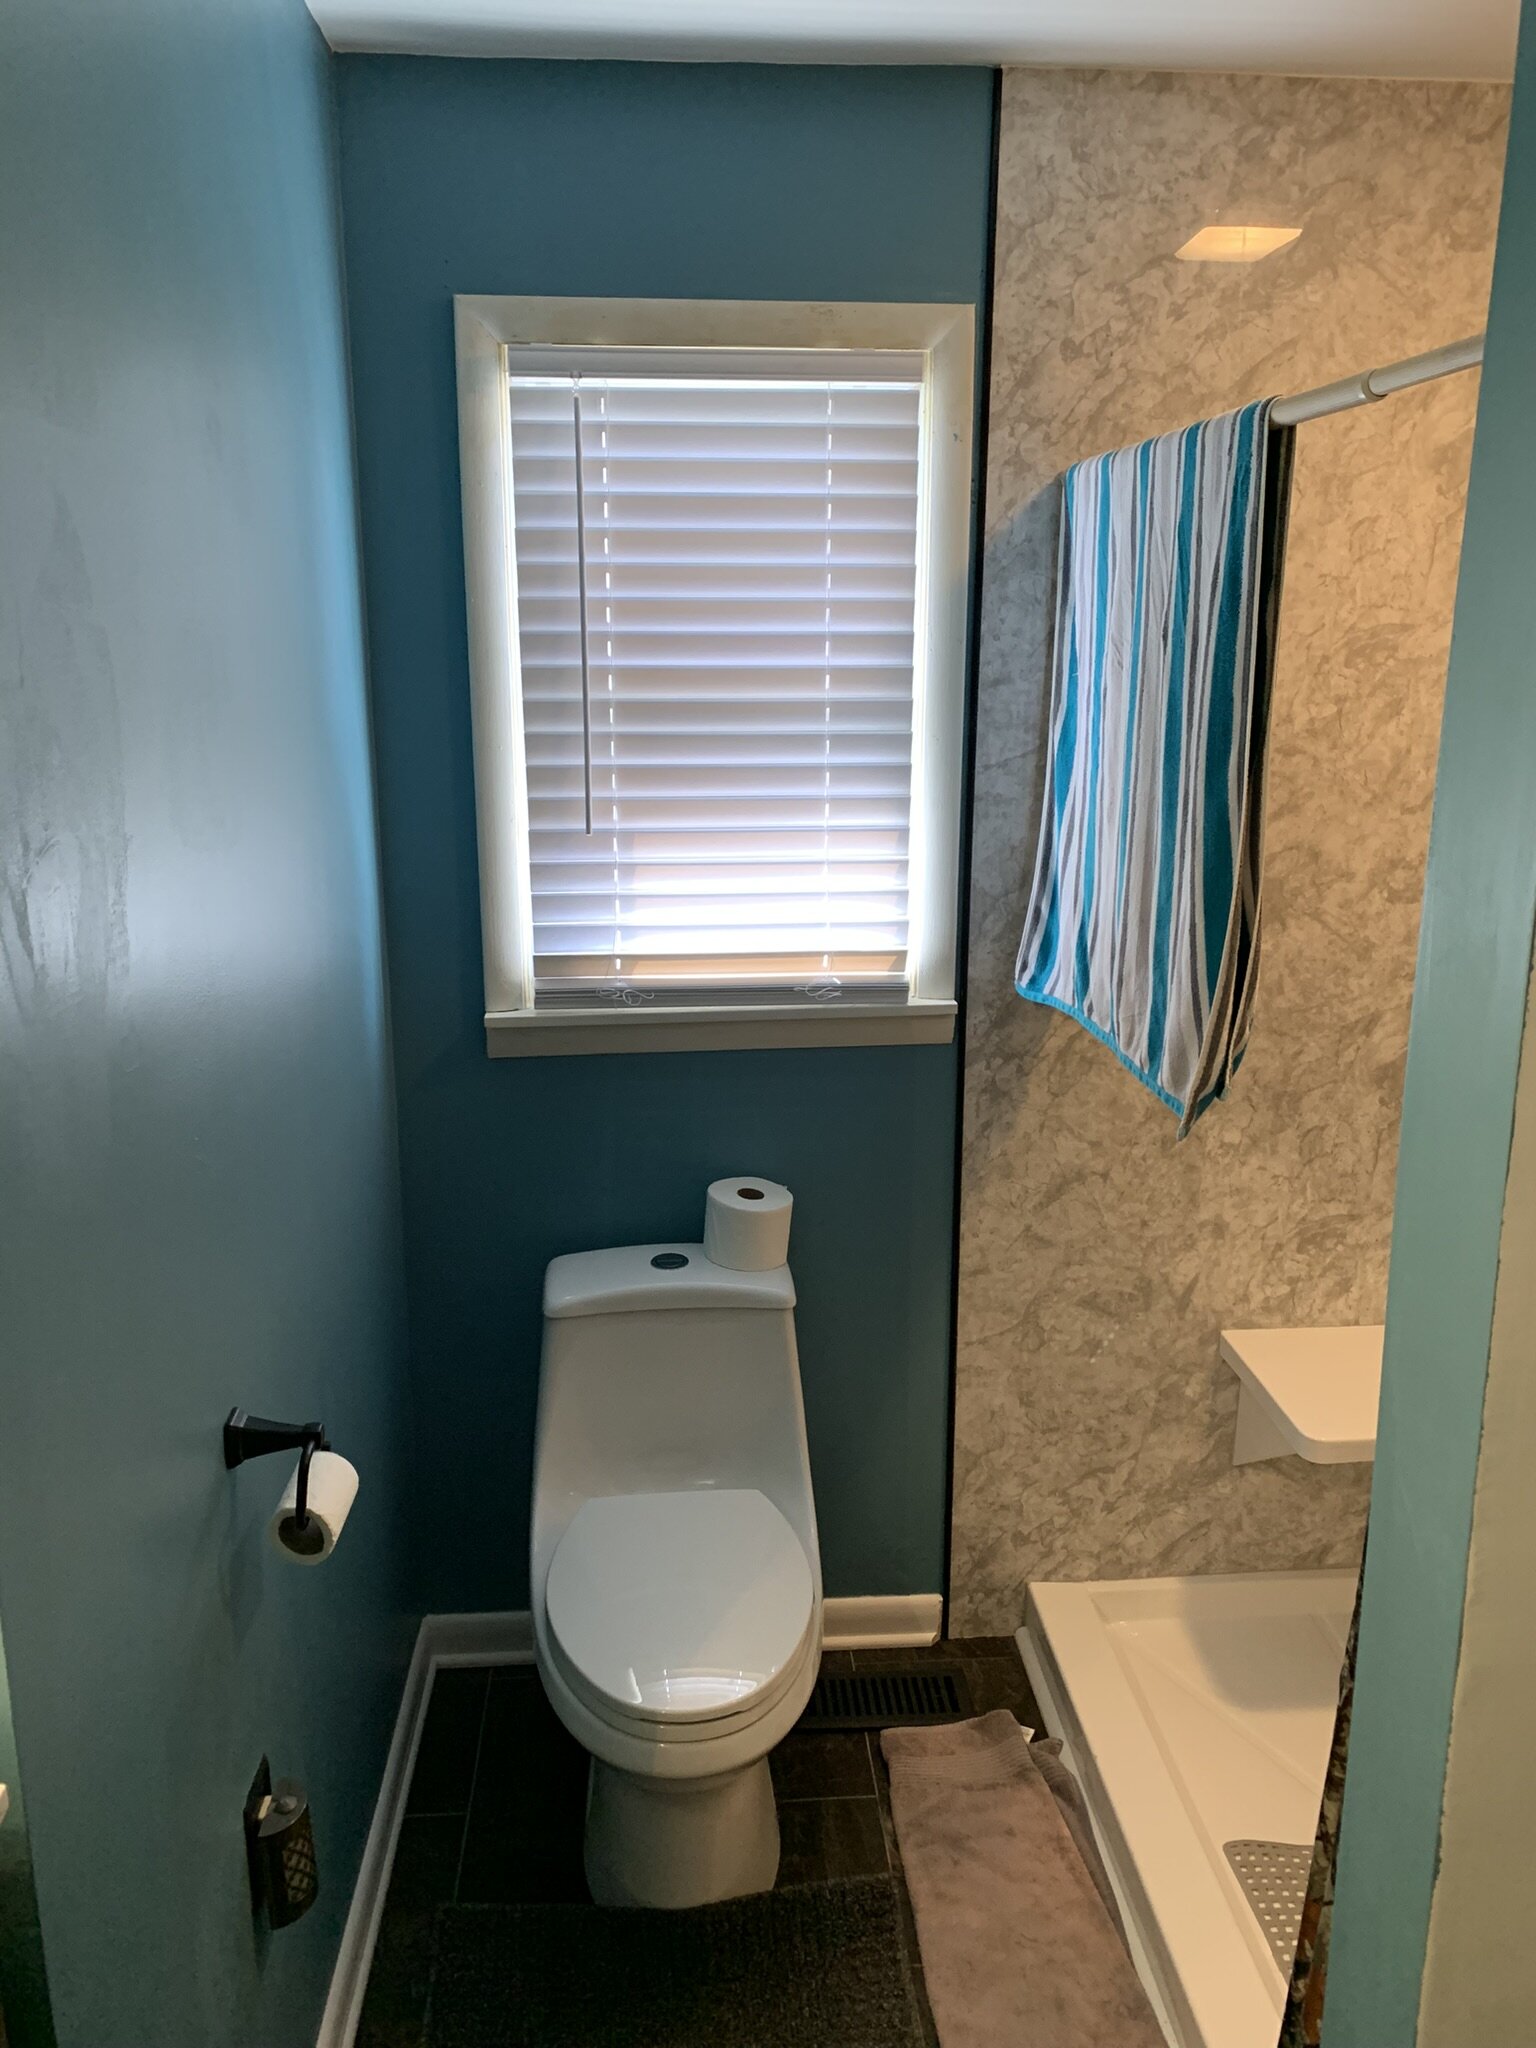 New toilet and flooring